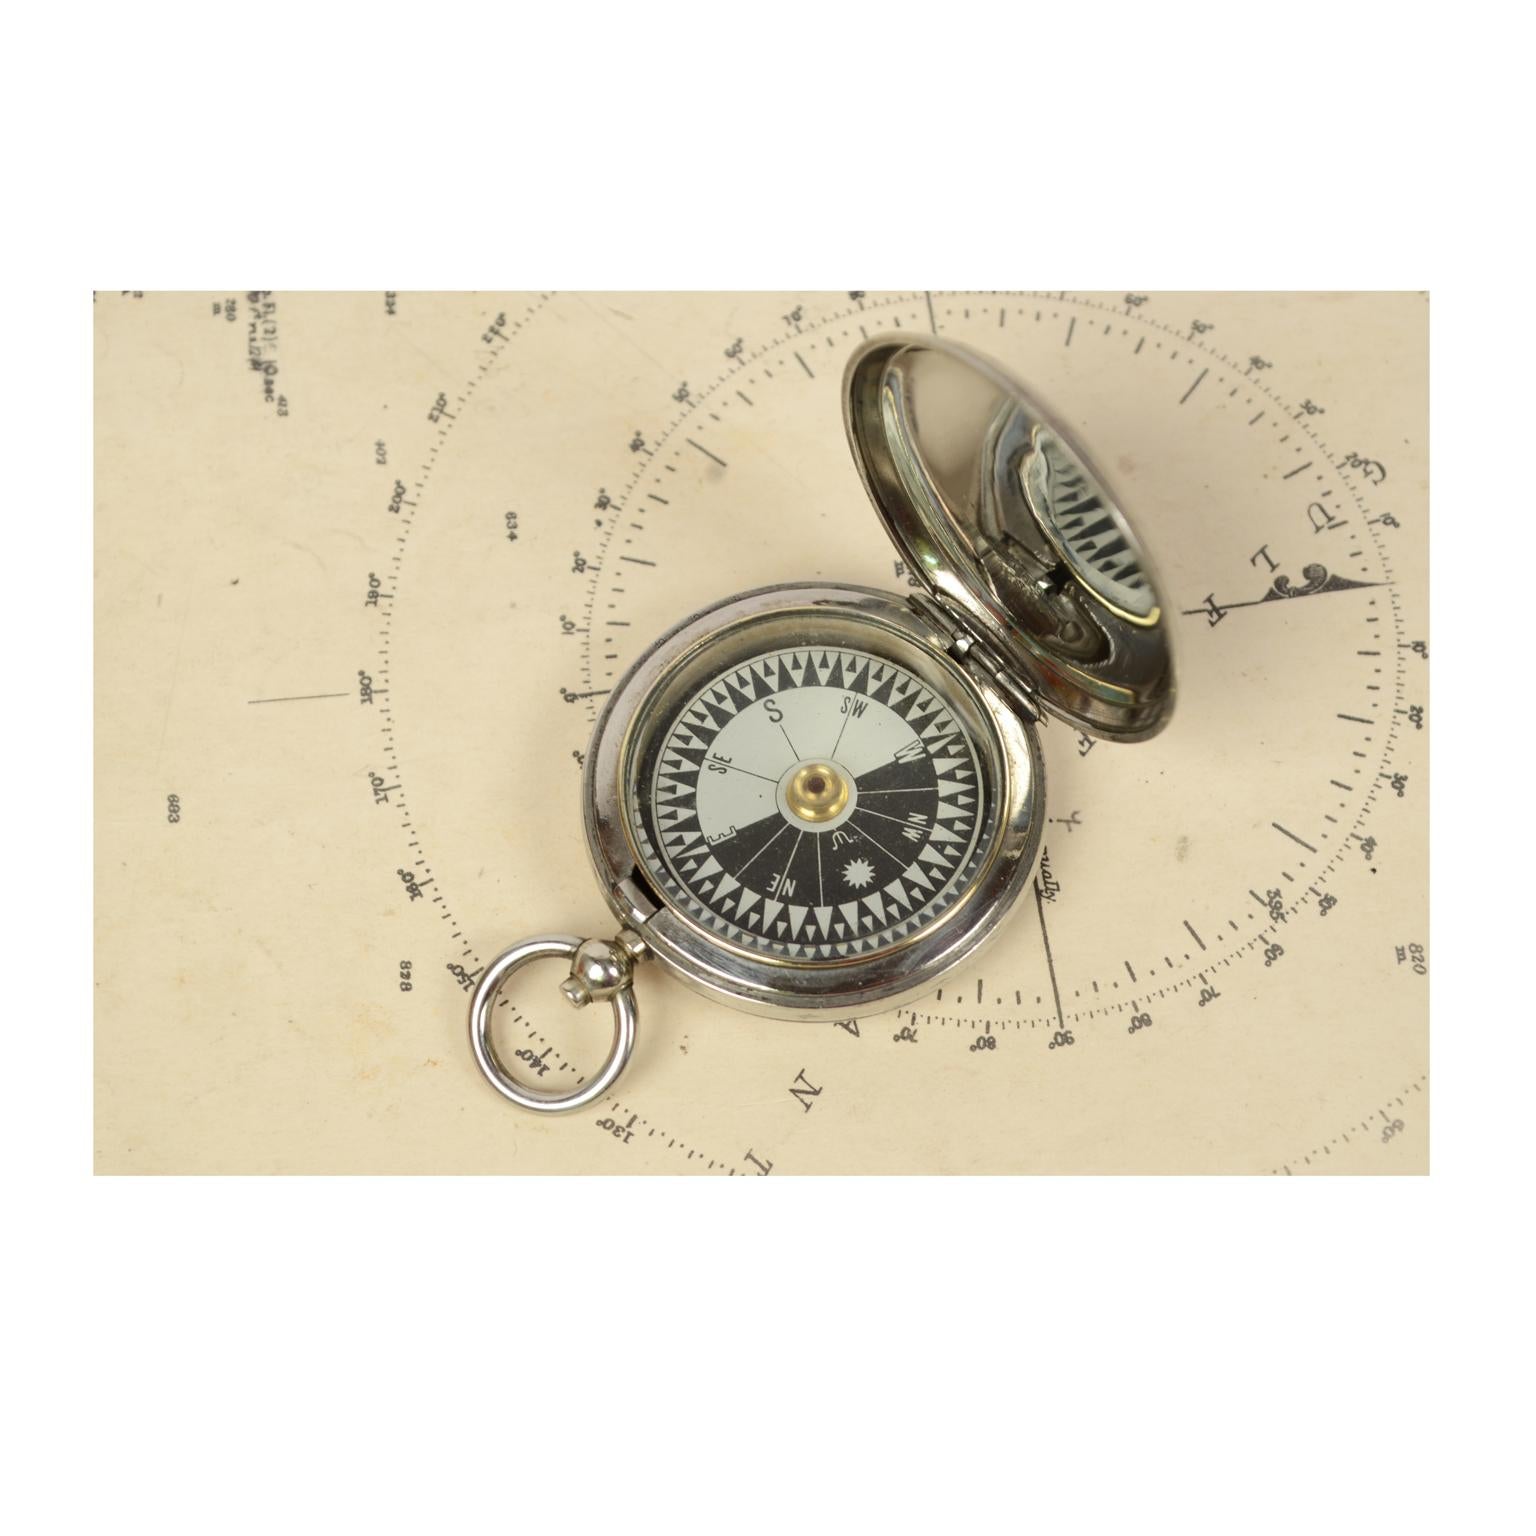 Pocket compass for a Royal air force officer signed Short & Mason Ltd London 1916 V 110312 made of chromed brass in the shape of a pocket watch. The compass is equipped with a lid with snap closure with release button inside the ring. Four-winds